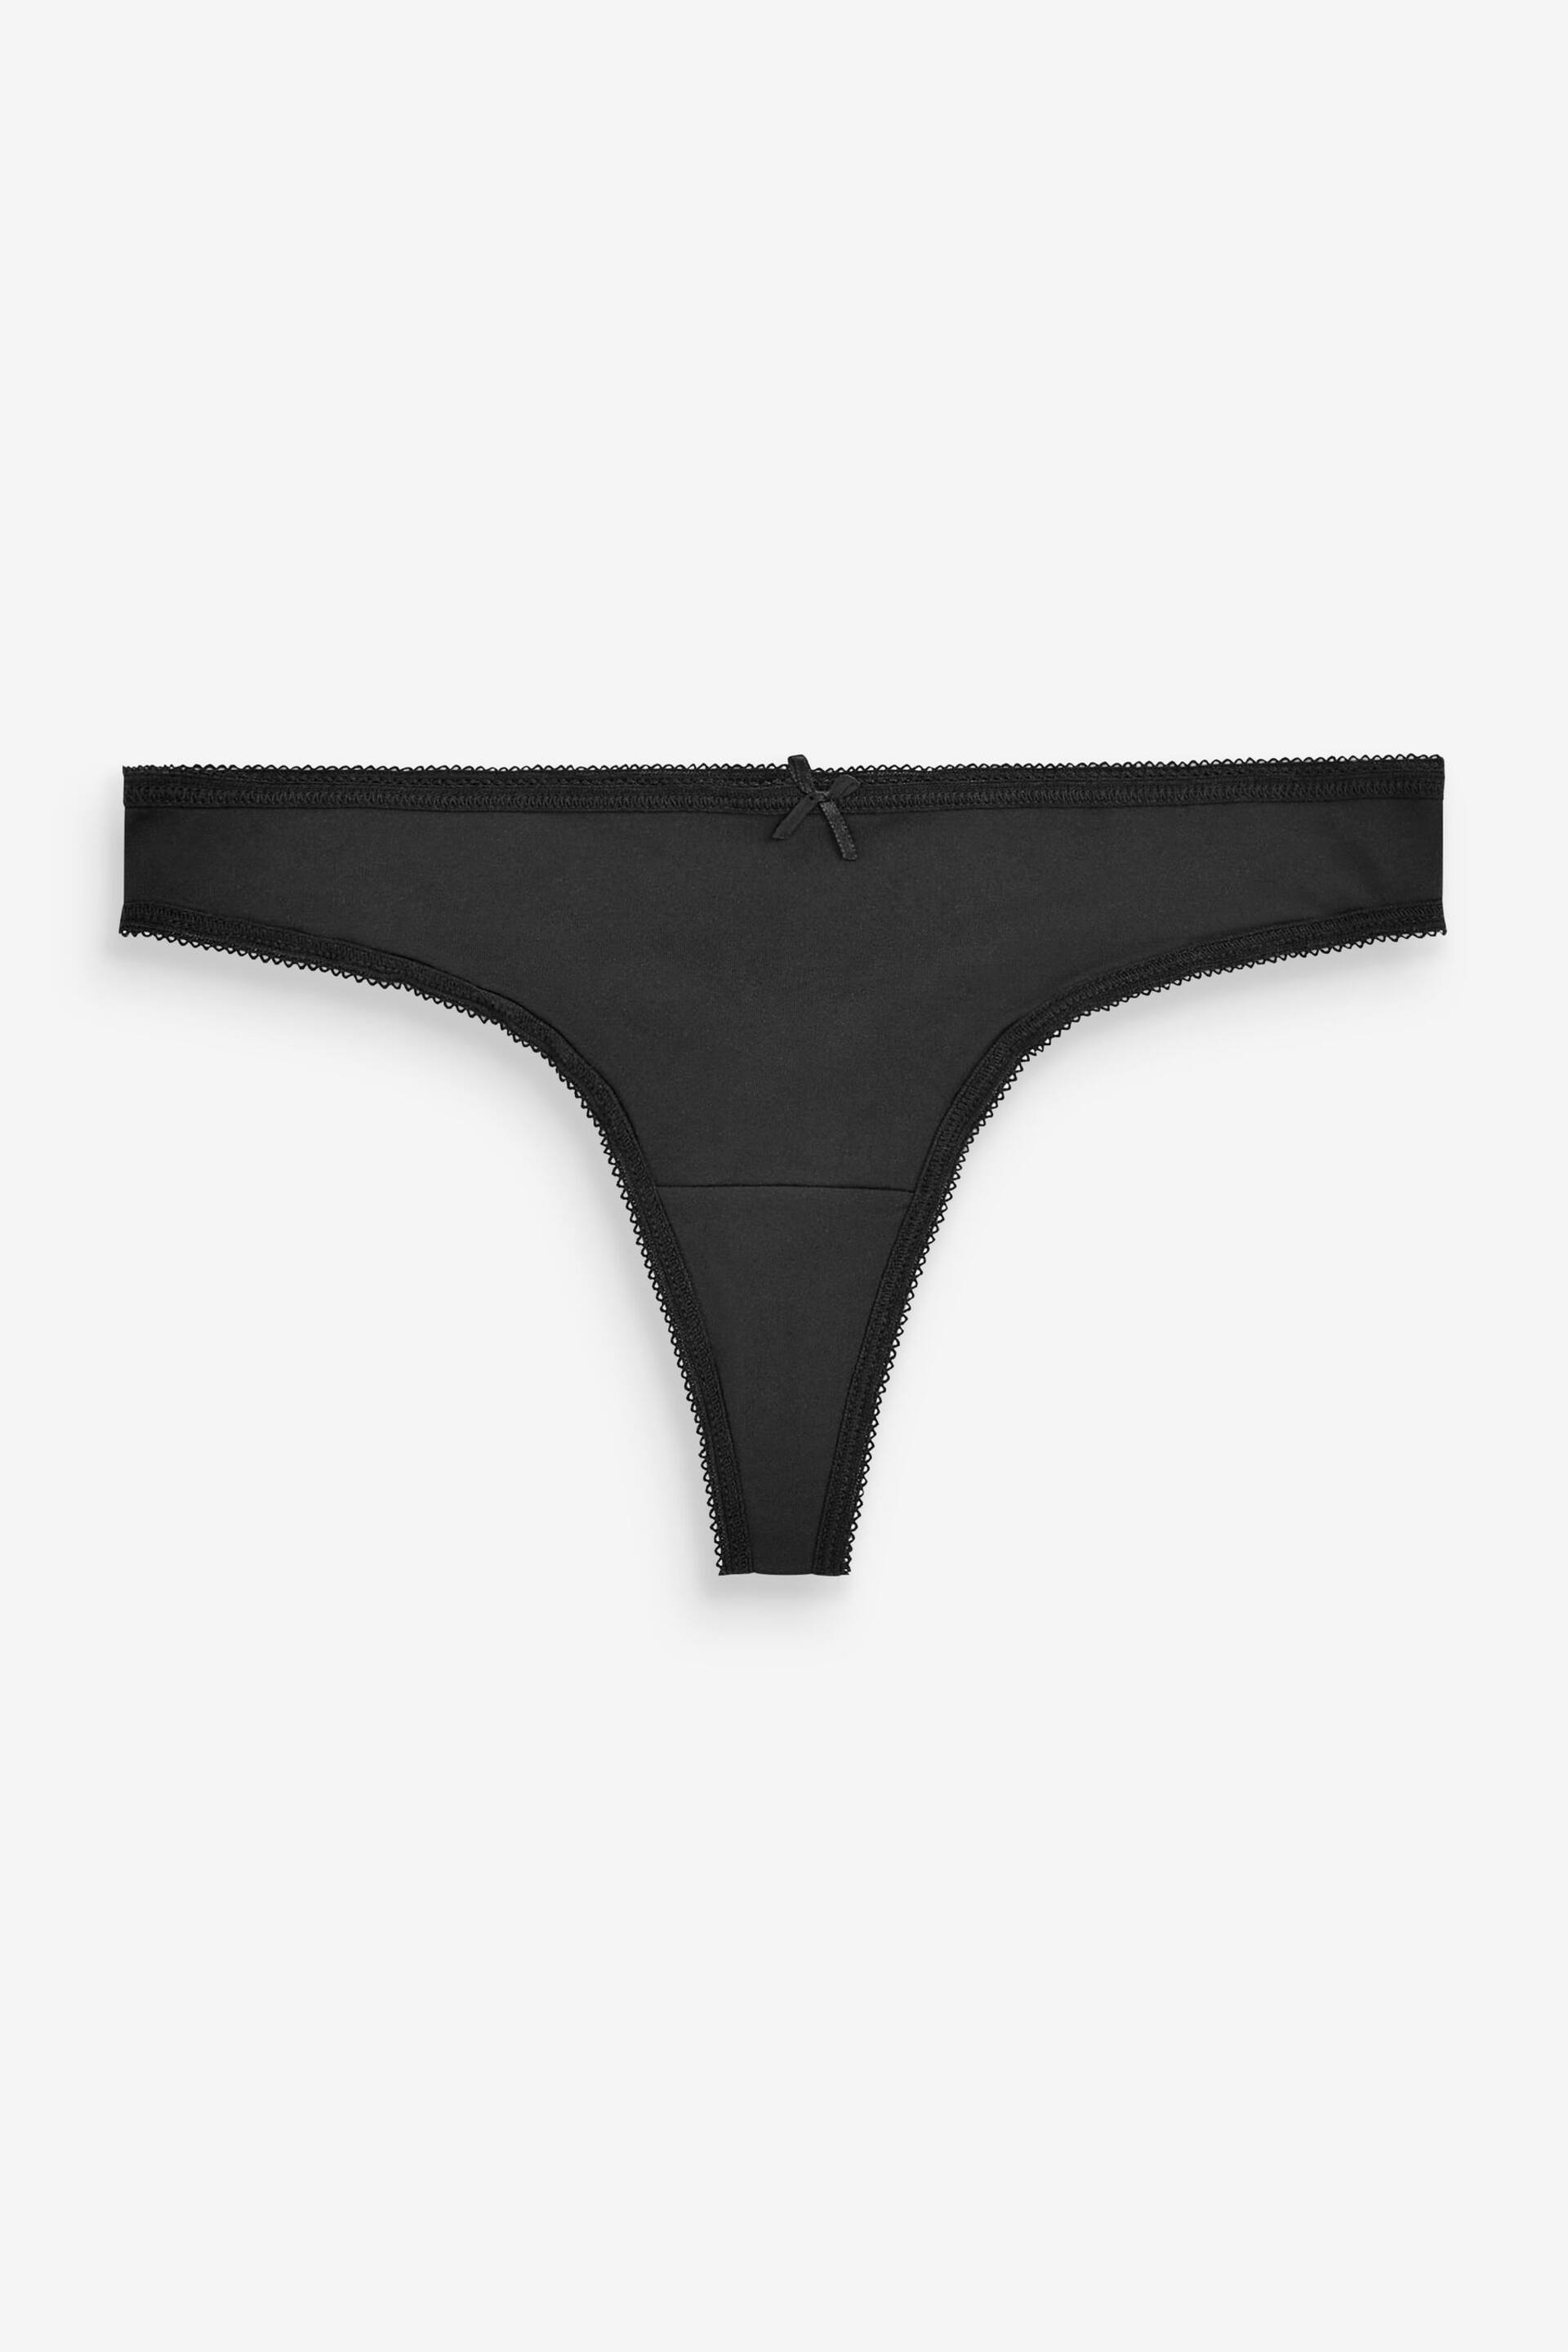 Black/White/Nude Thong Microfibre Knickers 5 Pack - Image 4 of 8